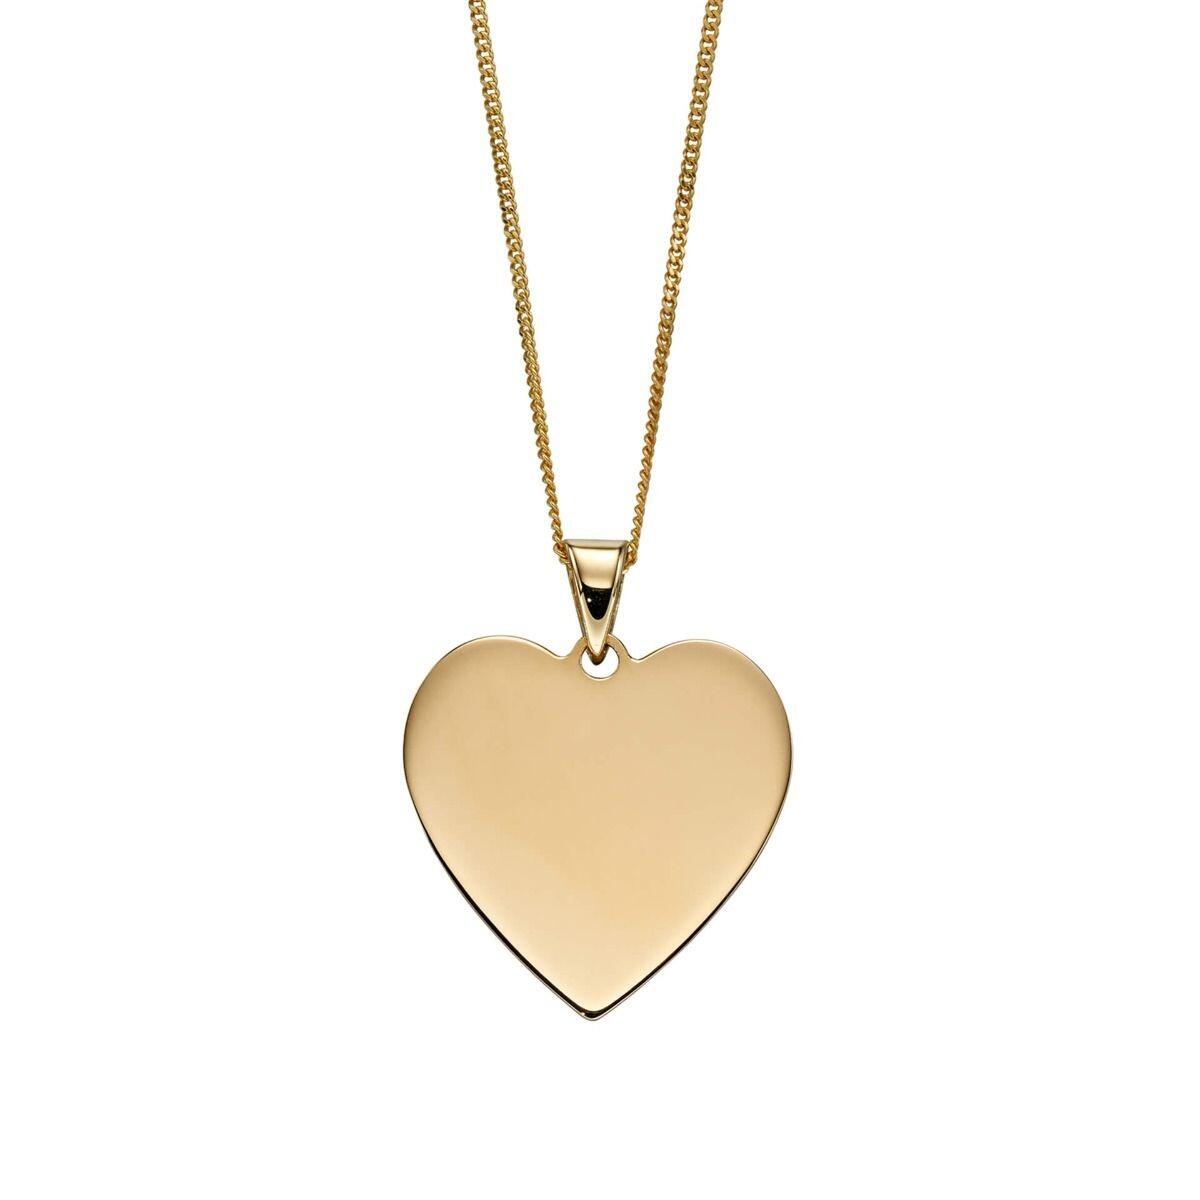 Engravable 9ct Gold Heart Tag Pendant & Chain